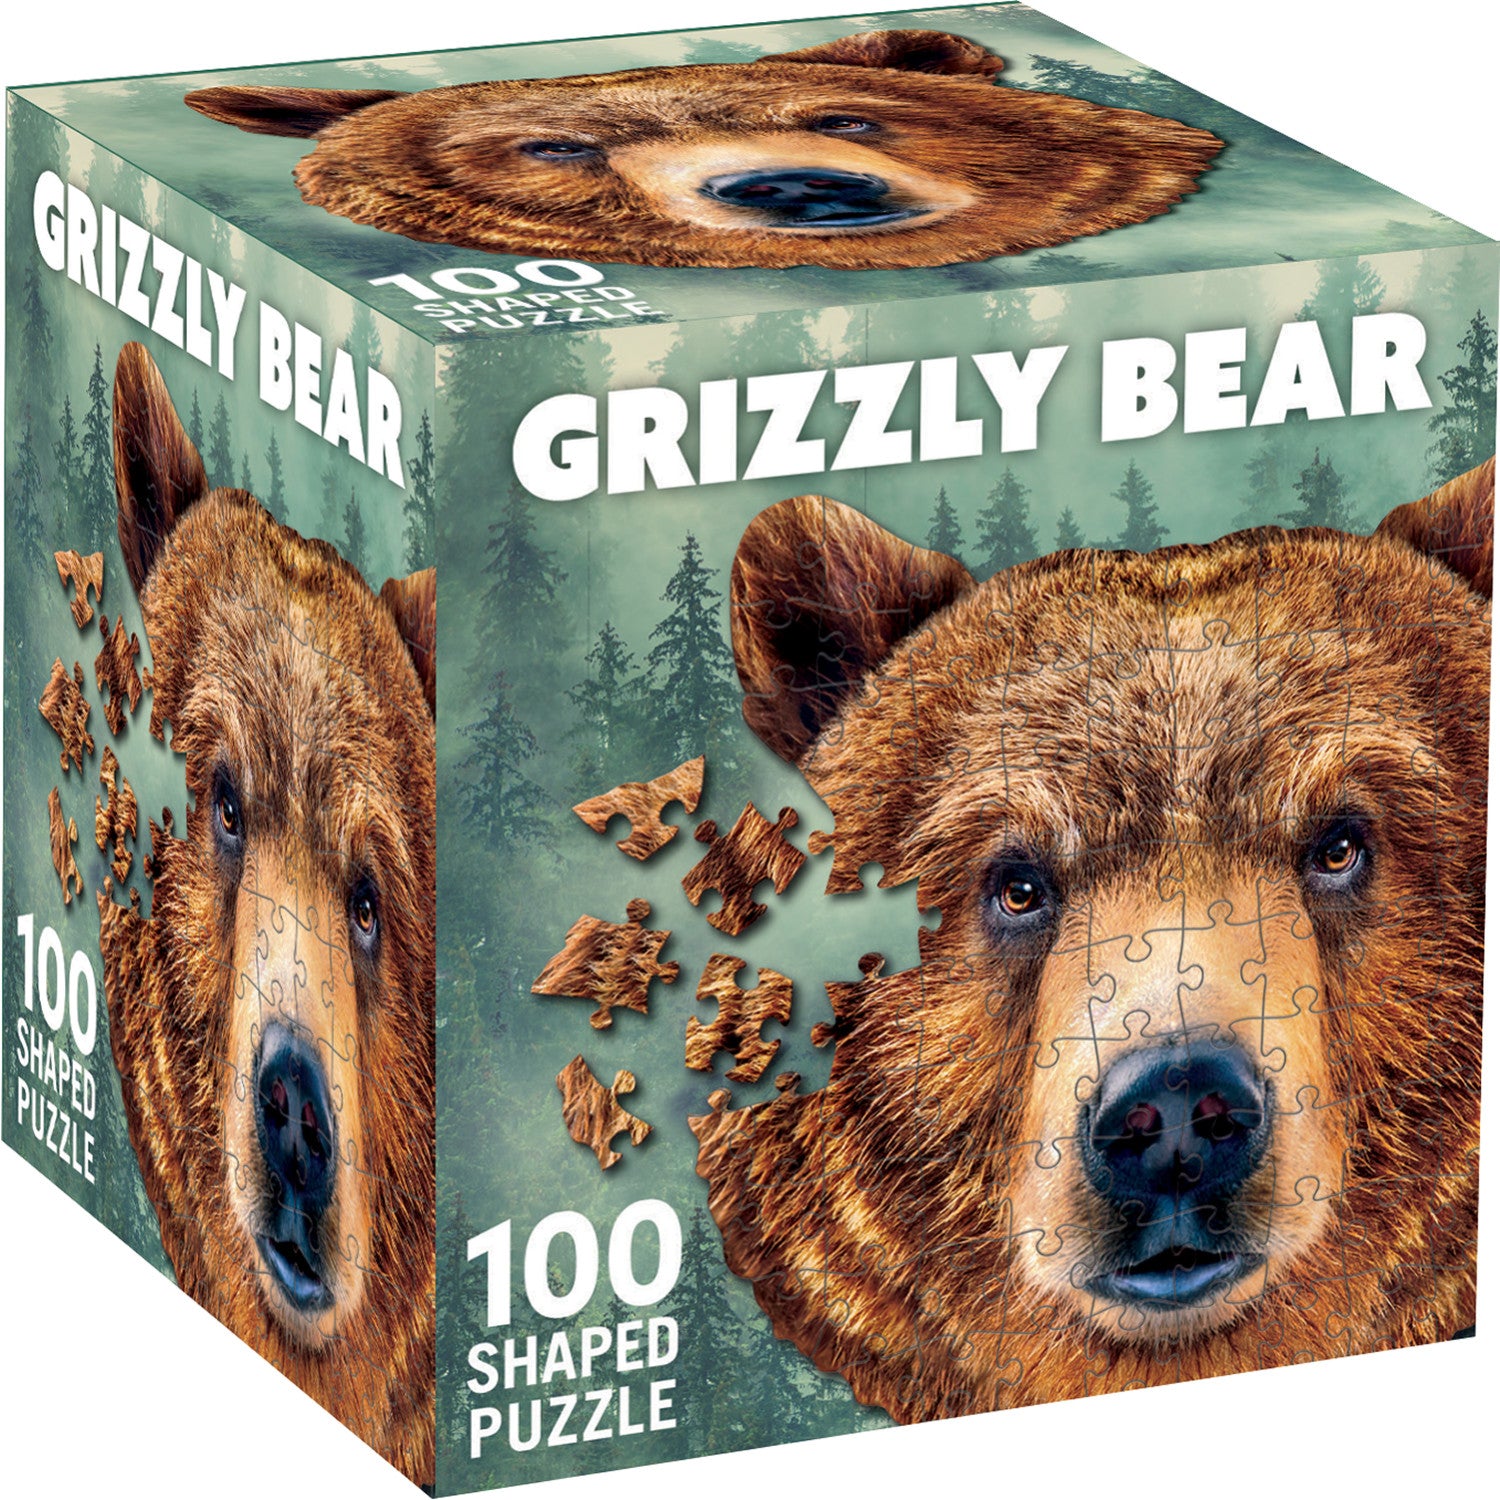 Grizzly Bear 100 Piece Shaped Jigsaw Puzzle